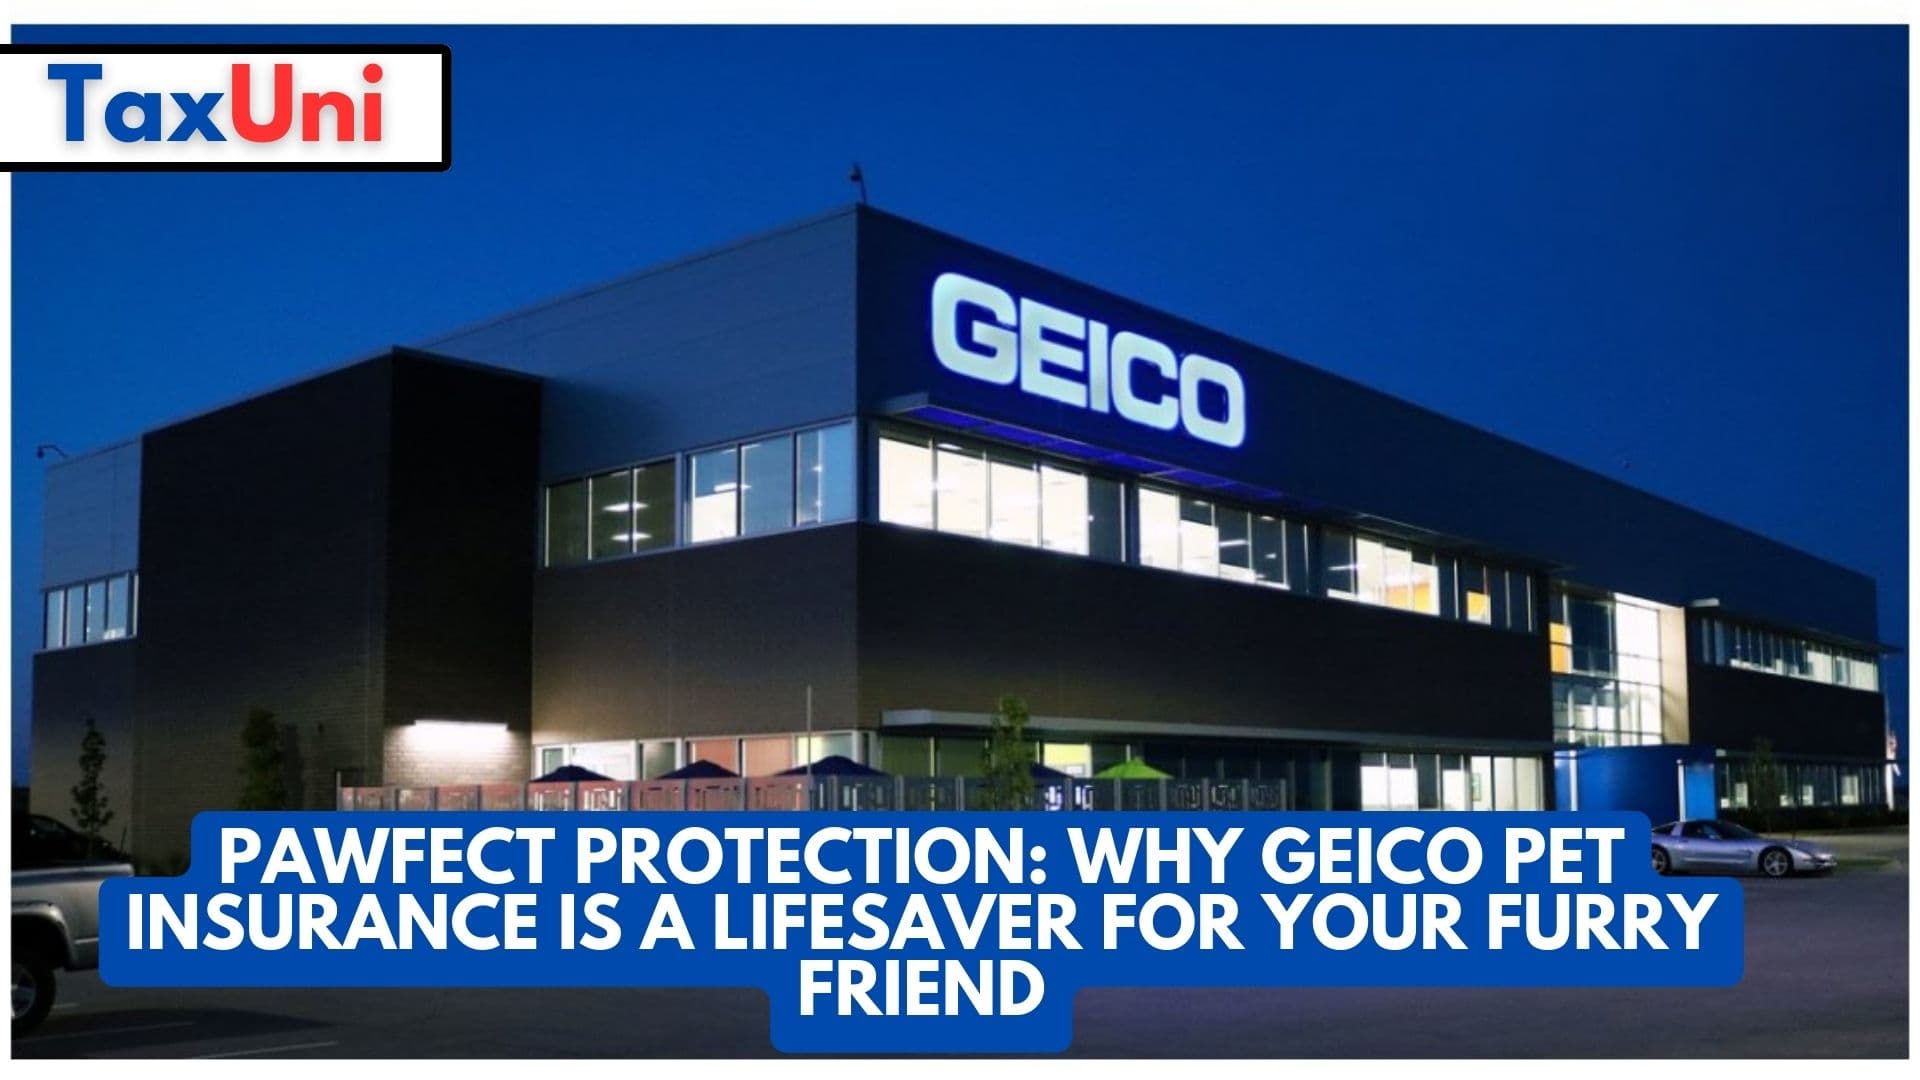 Pawfect Protection Why GEICO Pet Insurance is a Lifesaver for Your Furry Friend